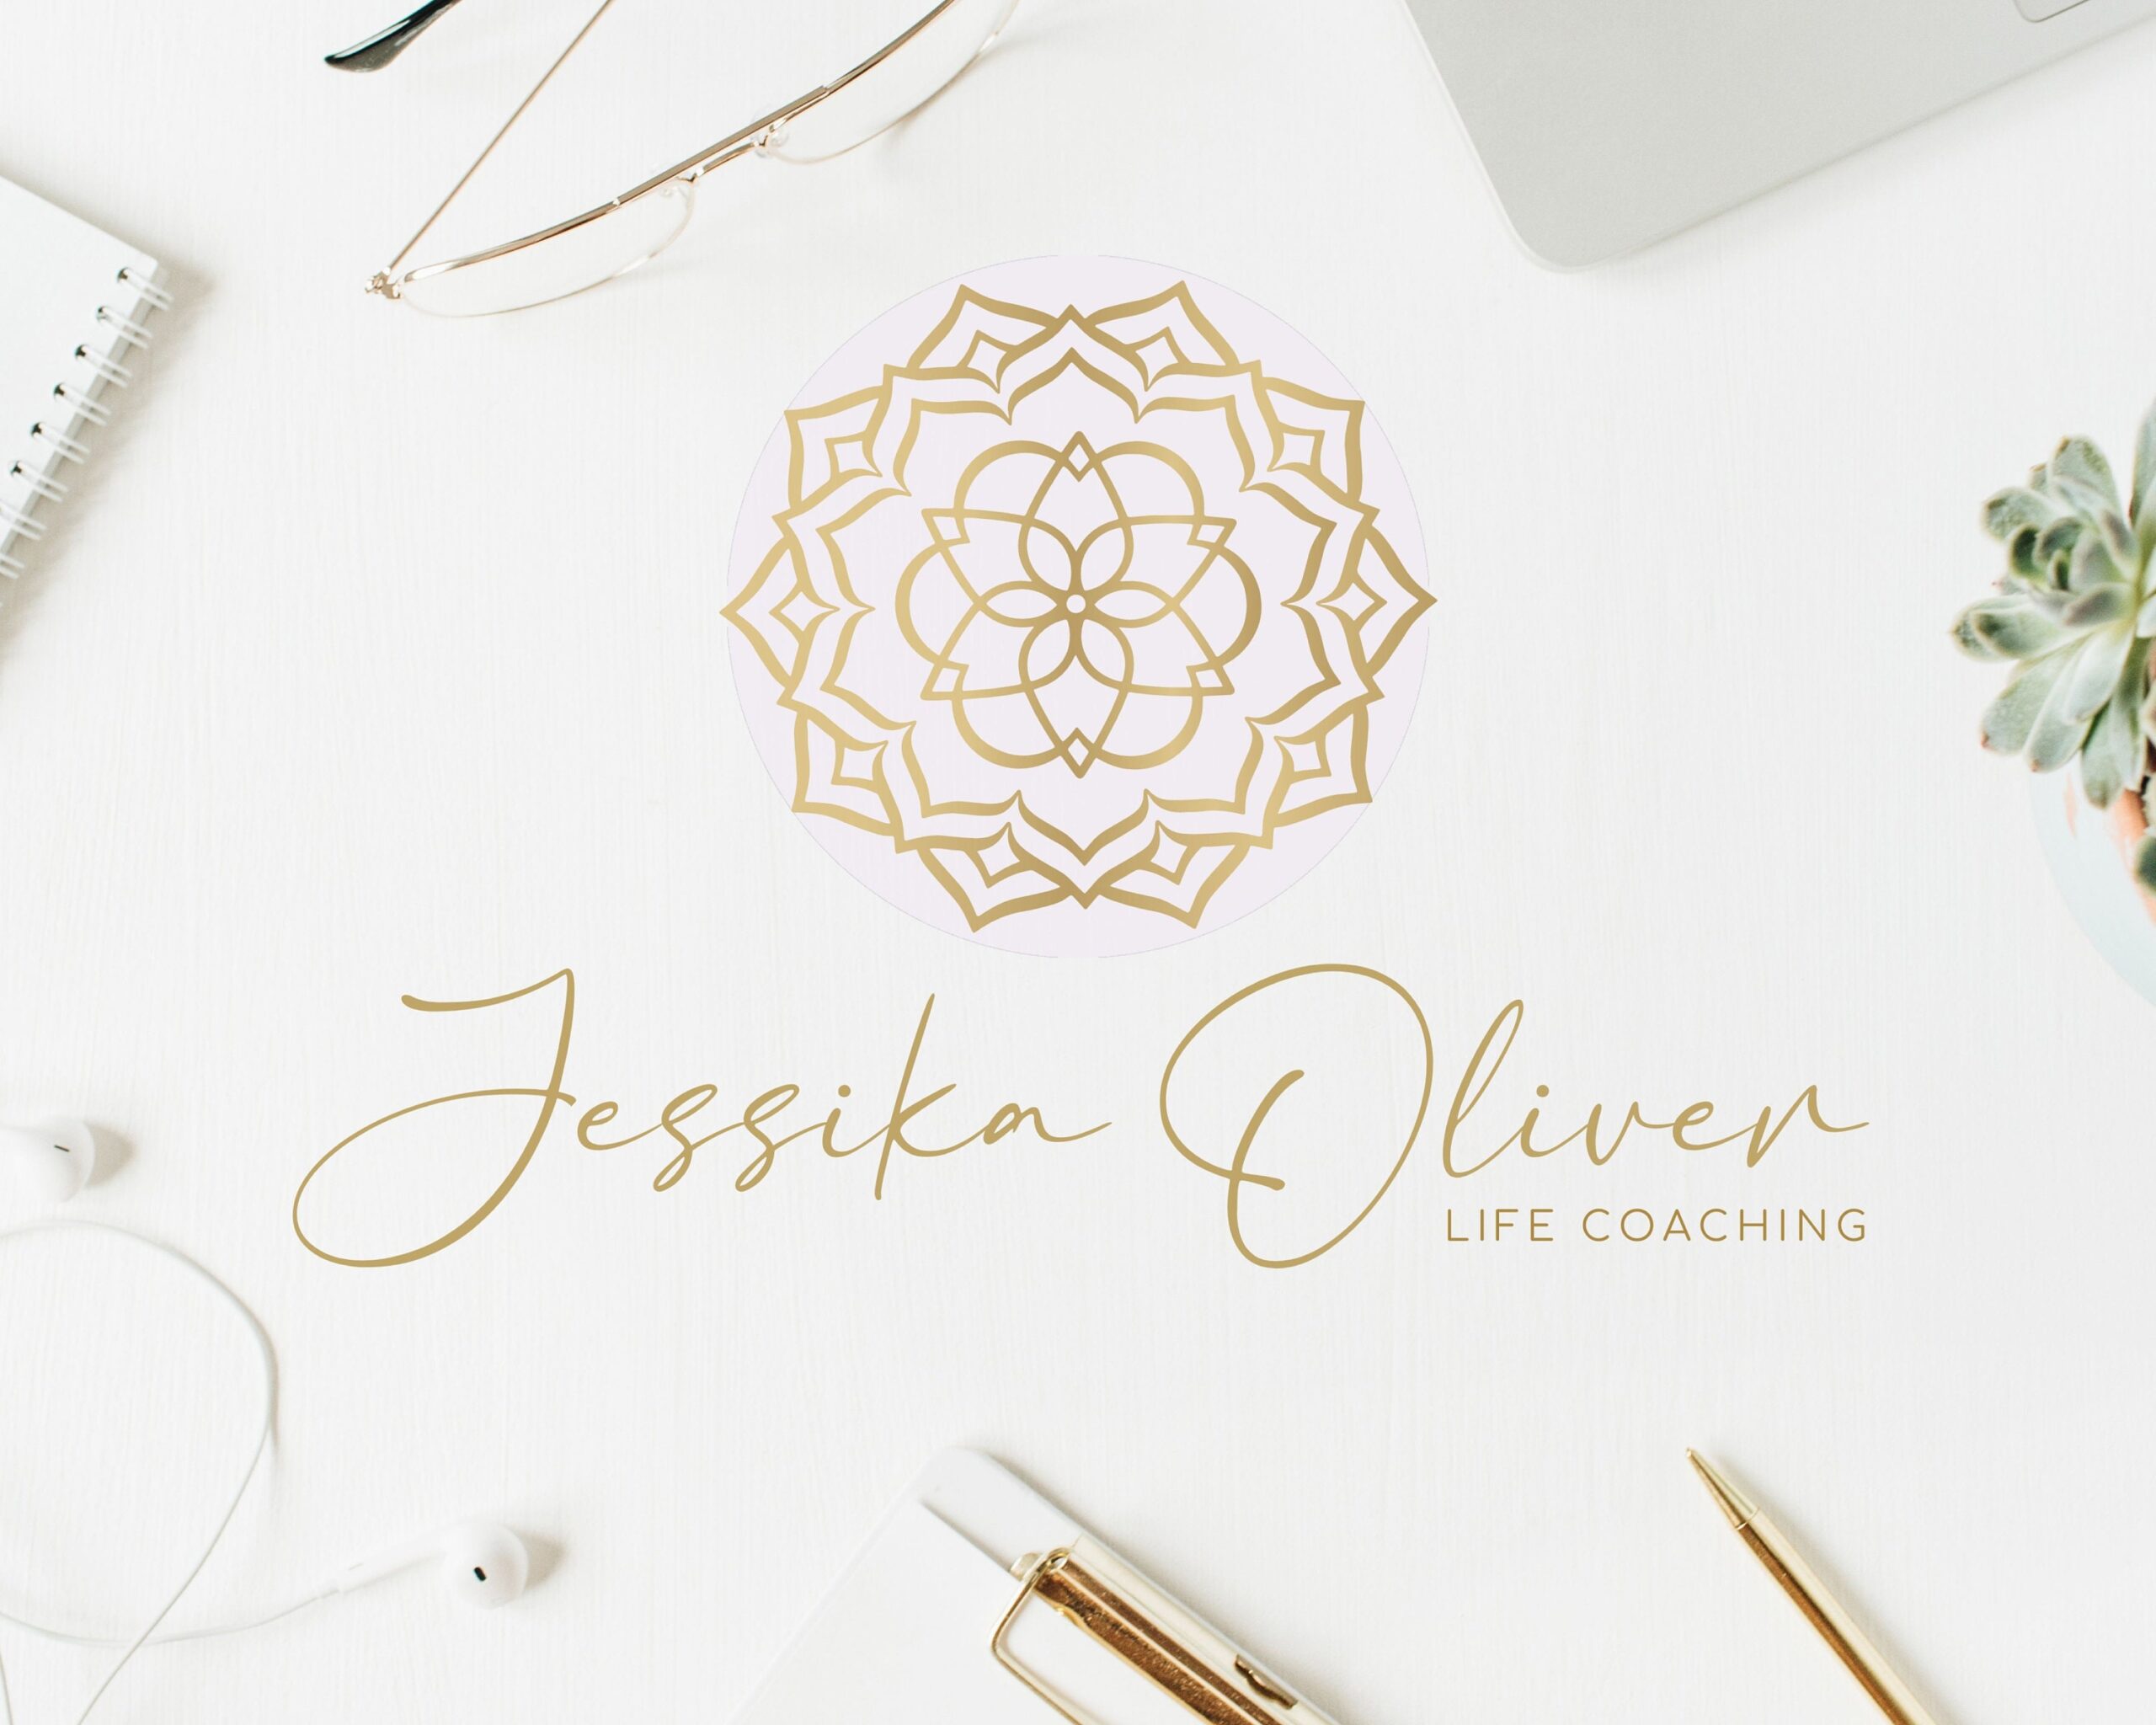 Lotus Flower Sacred Geometry Logo Design is a Geometric Art Design - I will add your name and tagline - All Designs are Included